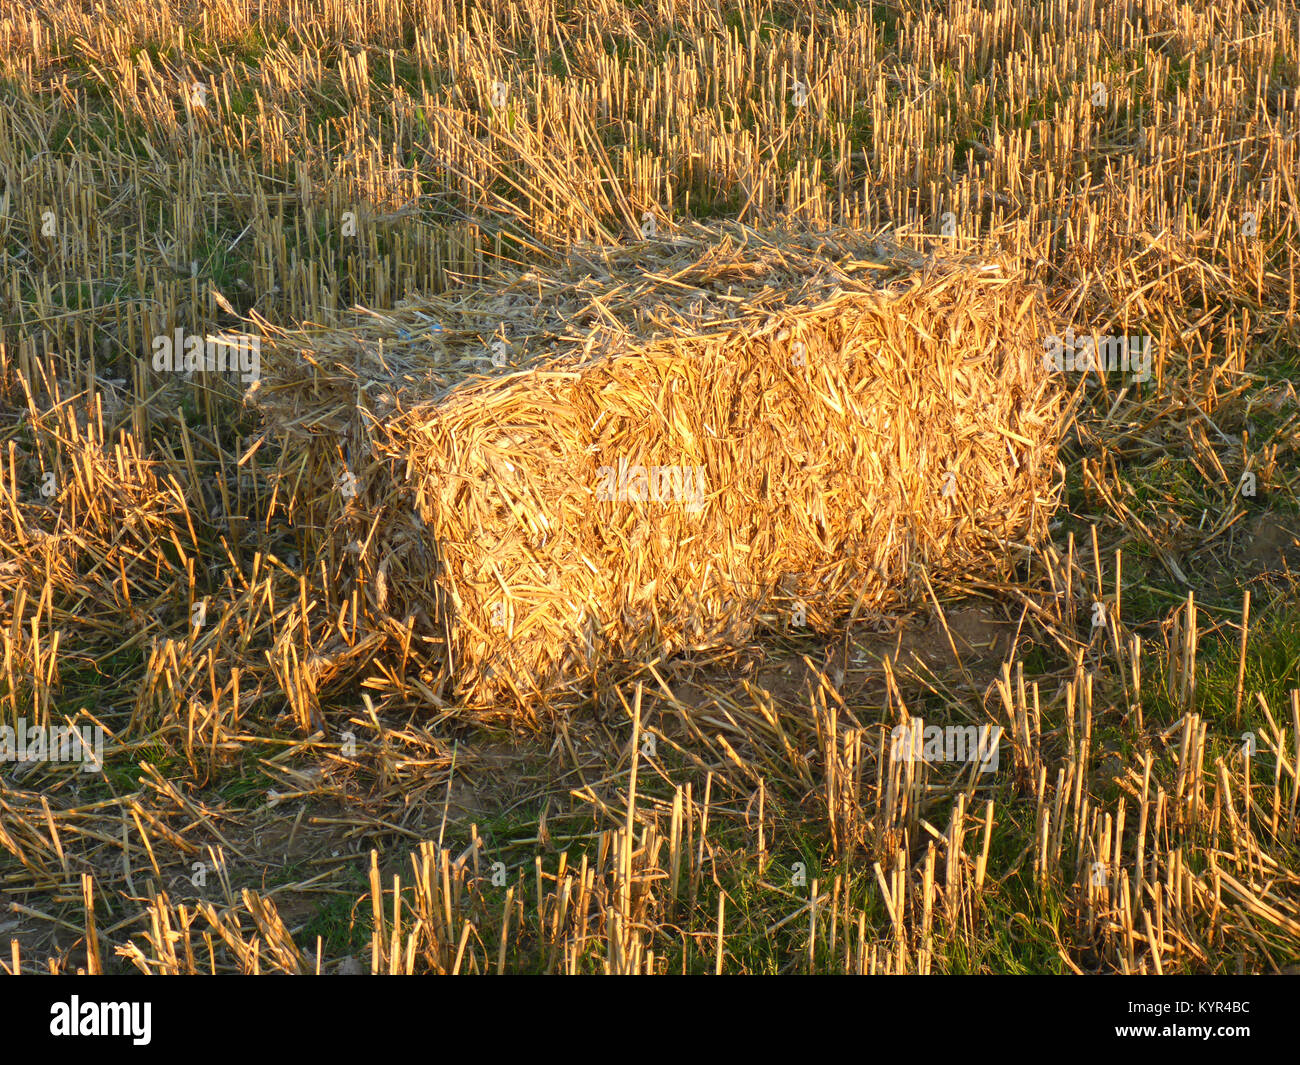 field with rectangular straw bales Stock Photo